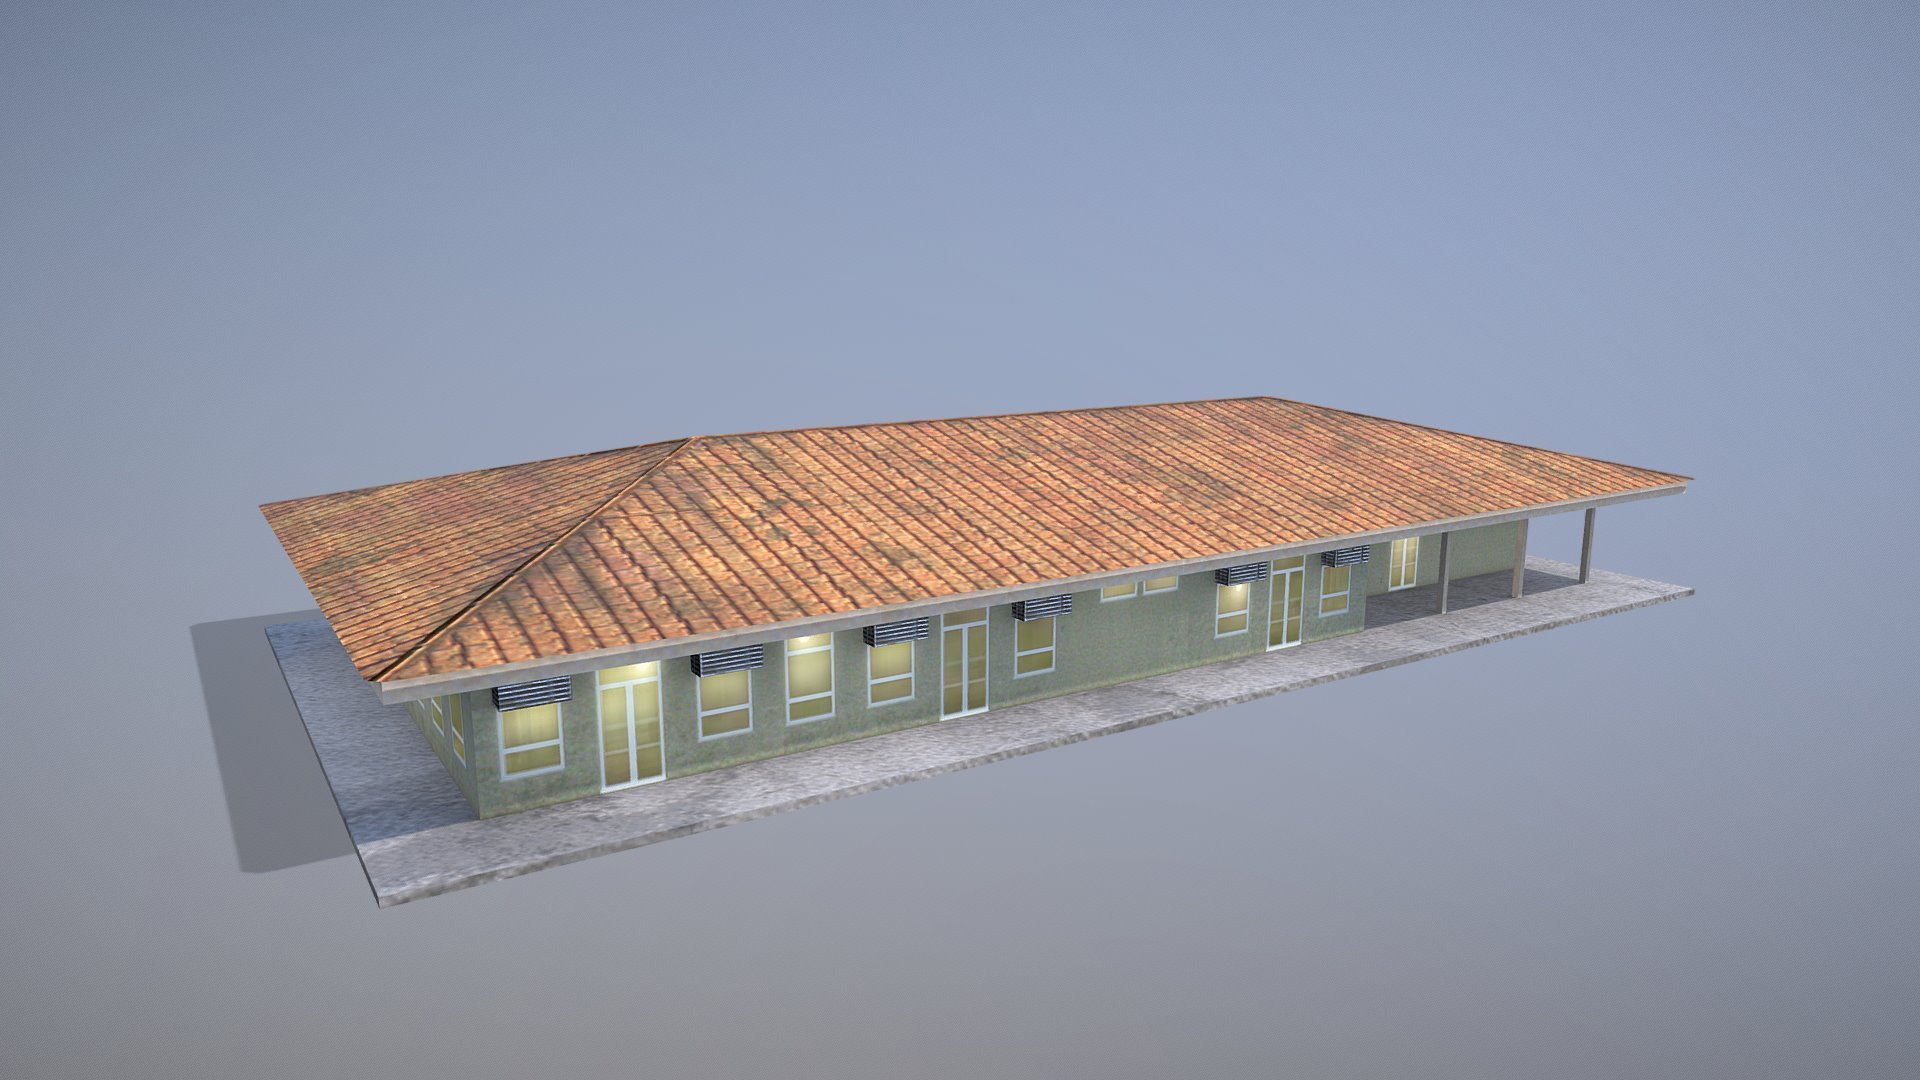 MilitaryBase_PortoVelho_House_01


LOD0 - (triangles 286) / (points 212)
LOD1 - (triangles 54) / (points 30)

Low-poly 3D model Airport MilitaryBase House with LODs




Textures for PBR shader (Albedo, AmbietOcclusion, Gloss, Specular, NormalMap, Emission(night)) they may be used with Unity3D, Unreal Engine. 

All pictures (previews) REALTIME rendering

Textures for NIGHT


Сontains 2 LODs




Textures:




MilitaryBase_PortoVelho_House_01_Albedo.png           - 1024x1024

MilitaryBase_PortoVelho_House_01_AmbietOcclusion.png      - 1024x1024

MilitaryBase_PortoVelho_House_01_Gloss.png            - 1024x1024

MilitaryBase_PortoVelho_House_01_Specular.png         - 1024x1024

MilitaryBase_PortoVelho_House_01_NormalMap.png        - 1024x1024 

MilitaryBase_PortoVelho_House_01_Emission.png         - 1024x1024



If you have questions about my models or need any kind of help, feel free to contact me and i'll do my best to help you 3d model